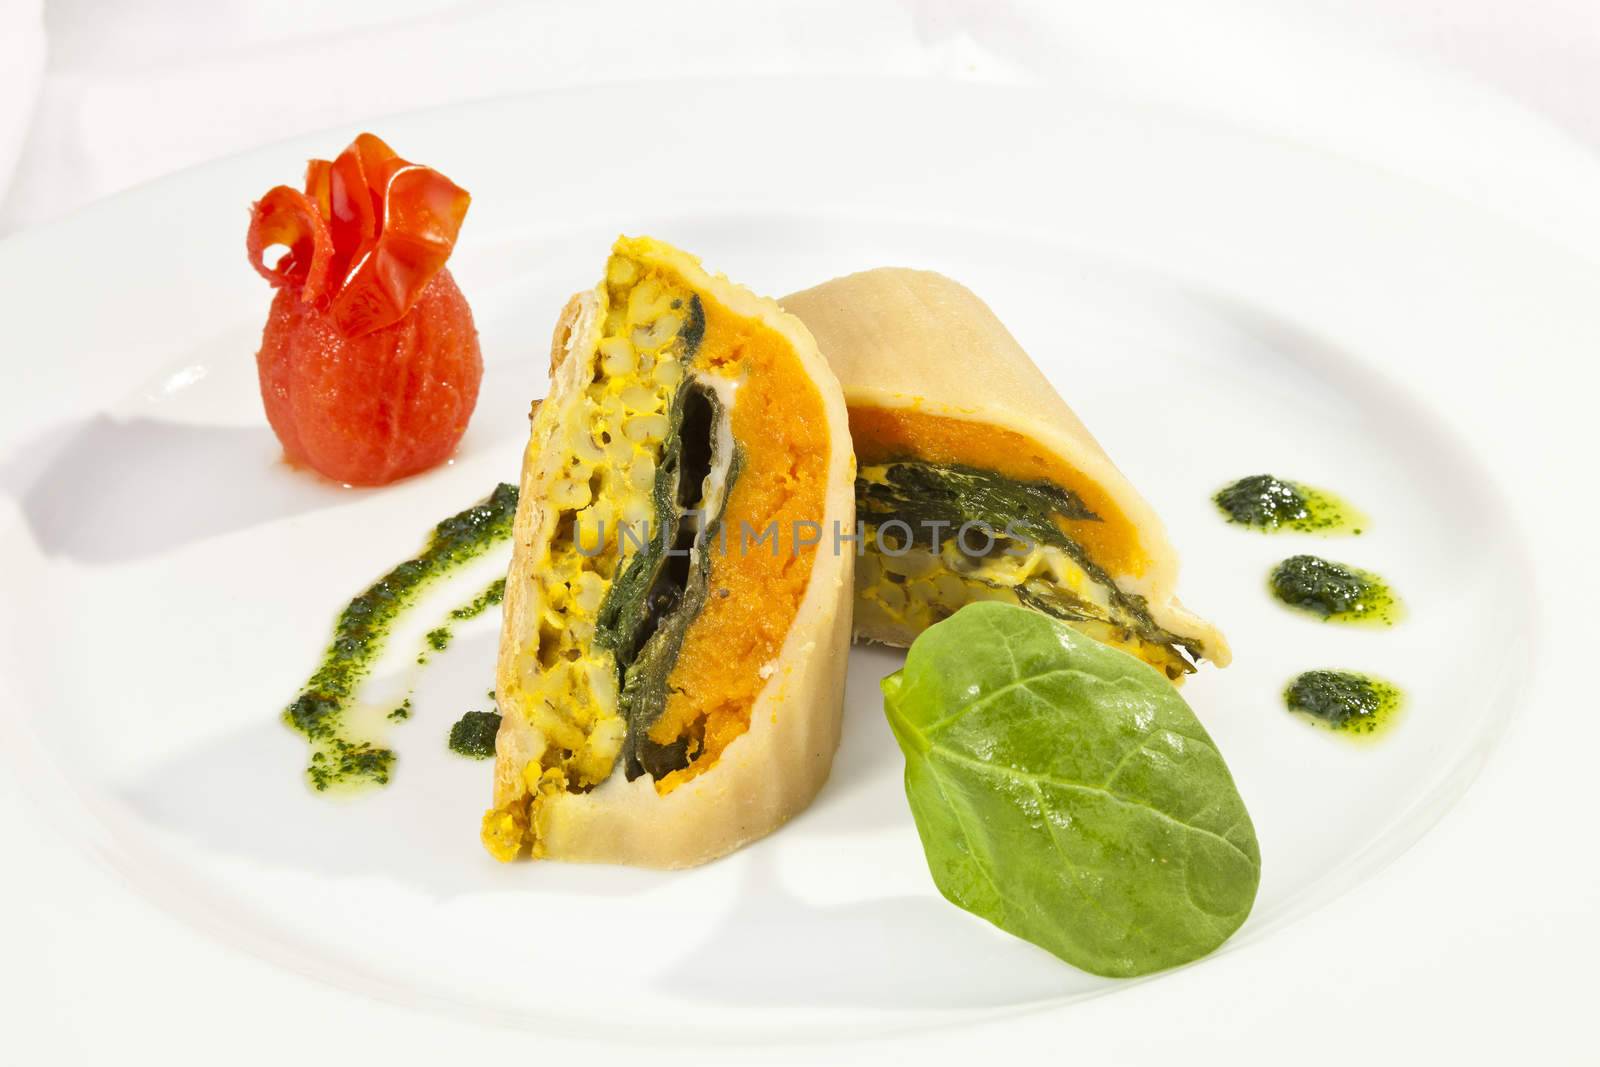 Potato roulade with spinach, carrot and curry rice by hanusst